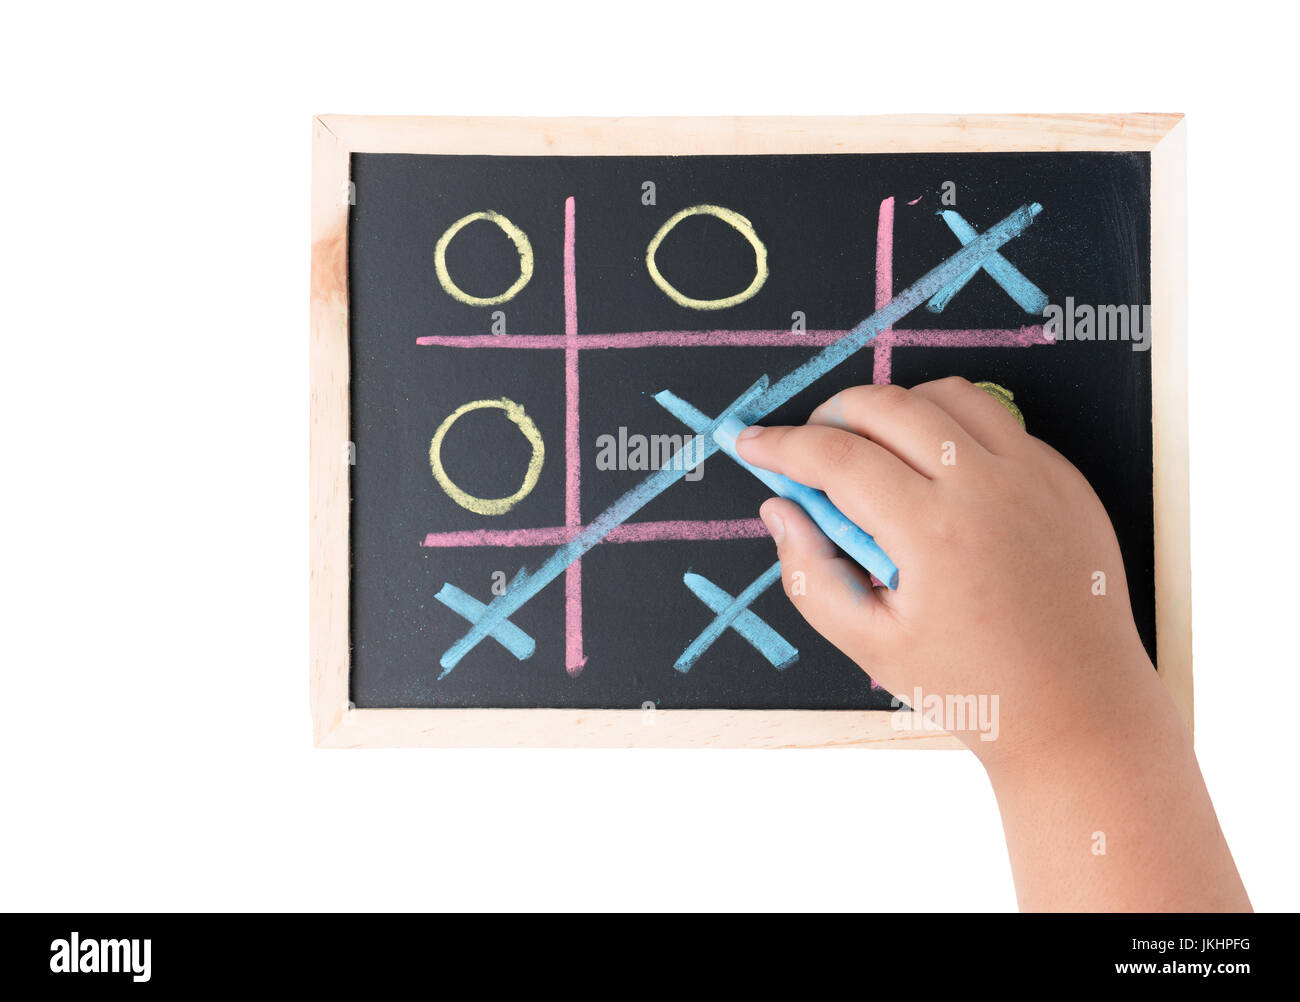 Tic Tac Toe Grid Chalk Hand Drawn Game Board Stock Vector - Illustration of  board, player: 238812429